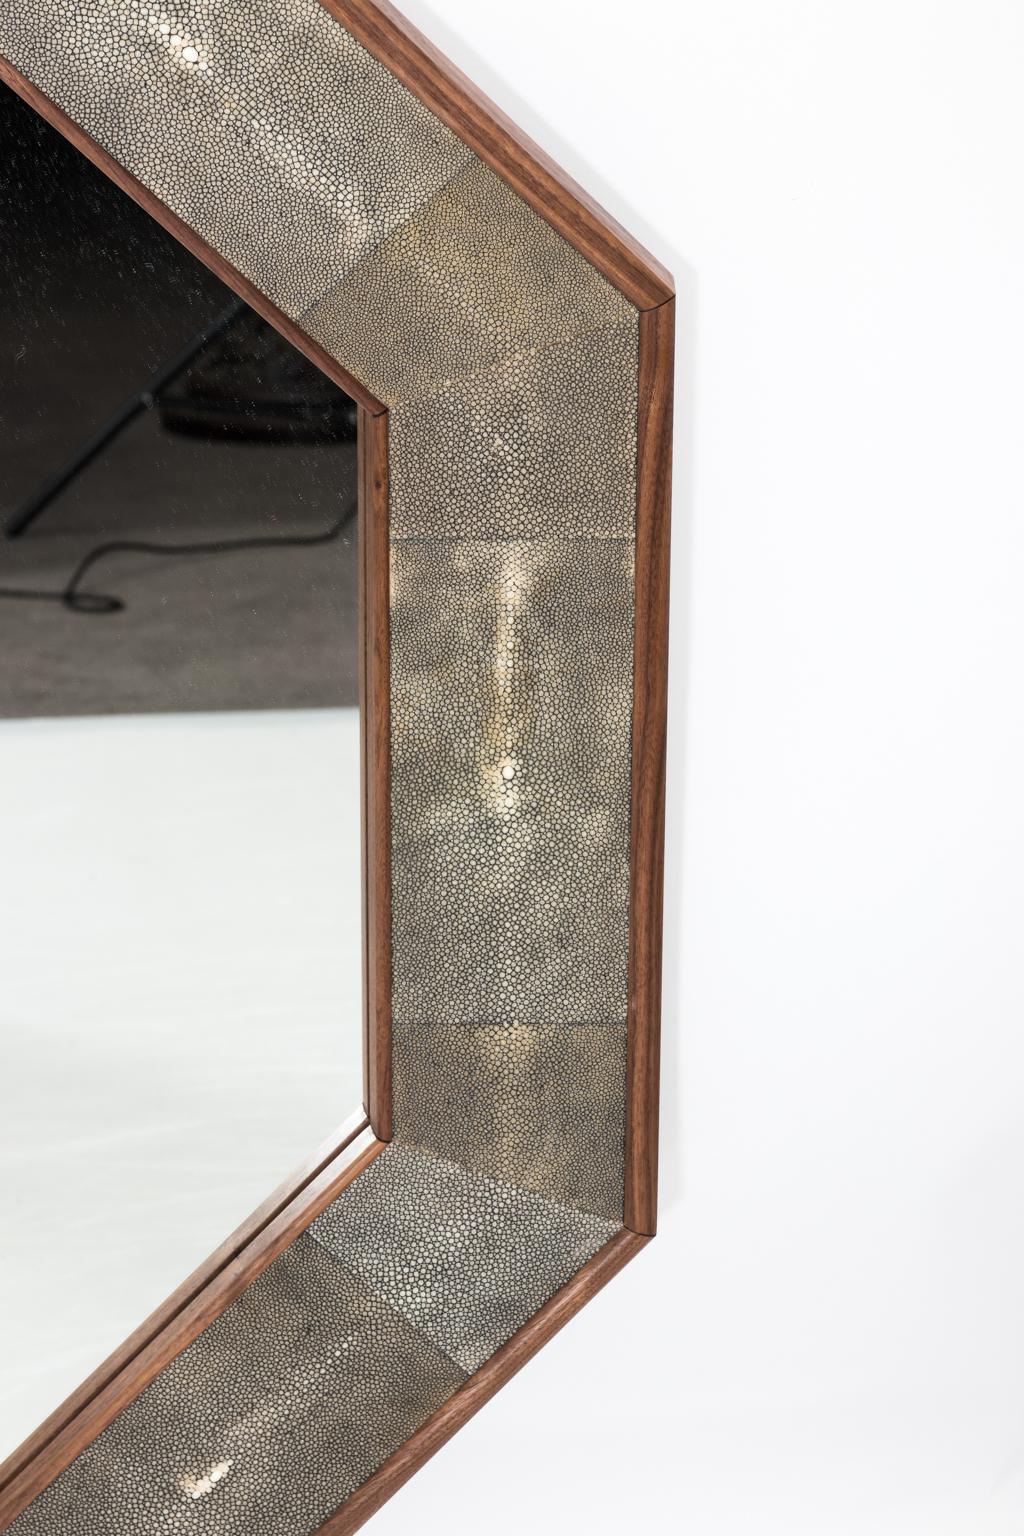 Octagonal Walnut and Shagreen Mirror In Good Condition In Stamford, CT